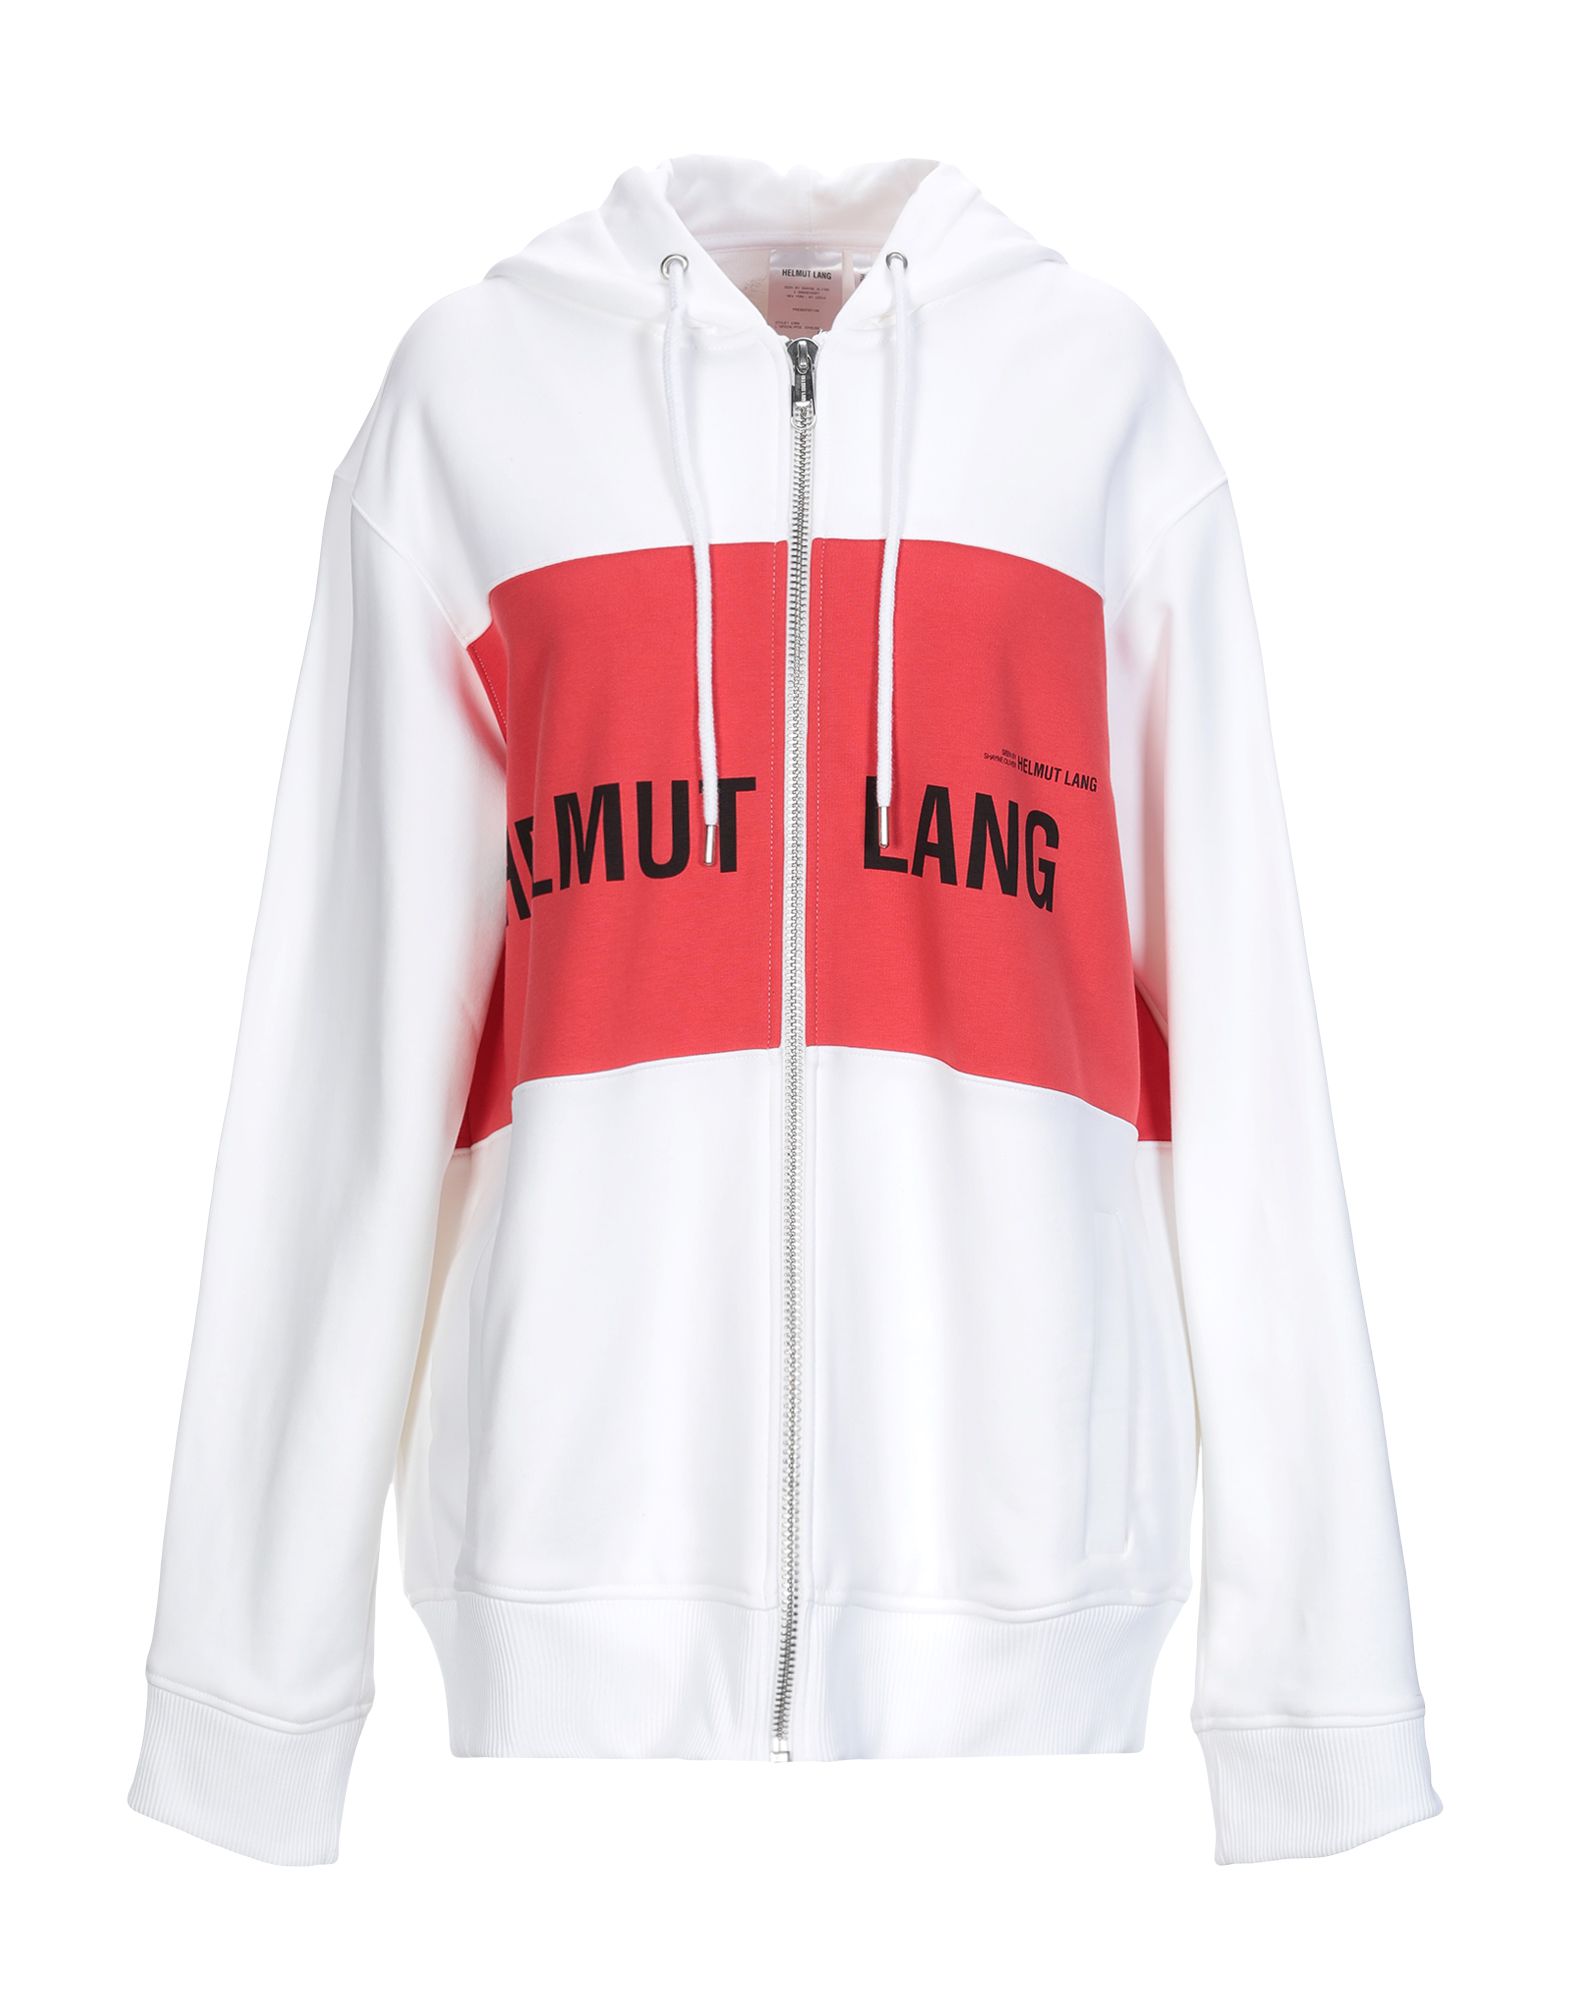 helmut lang red zip up